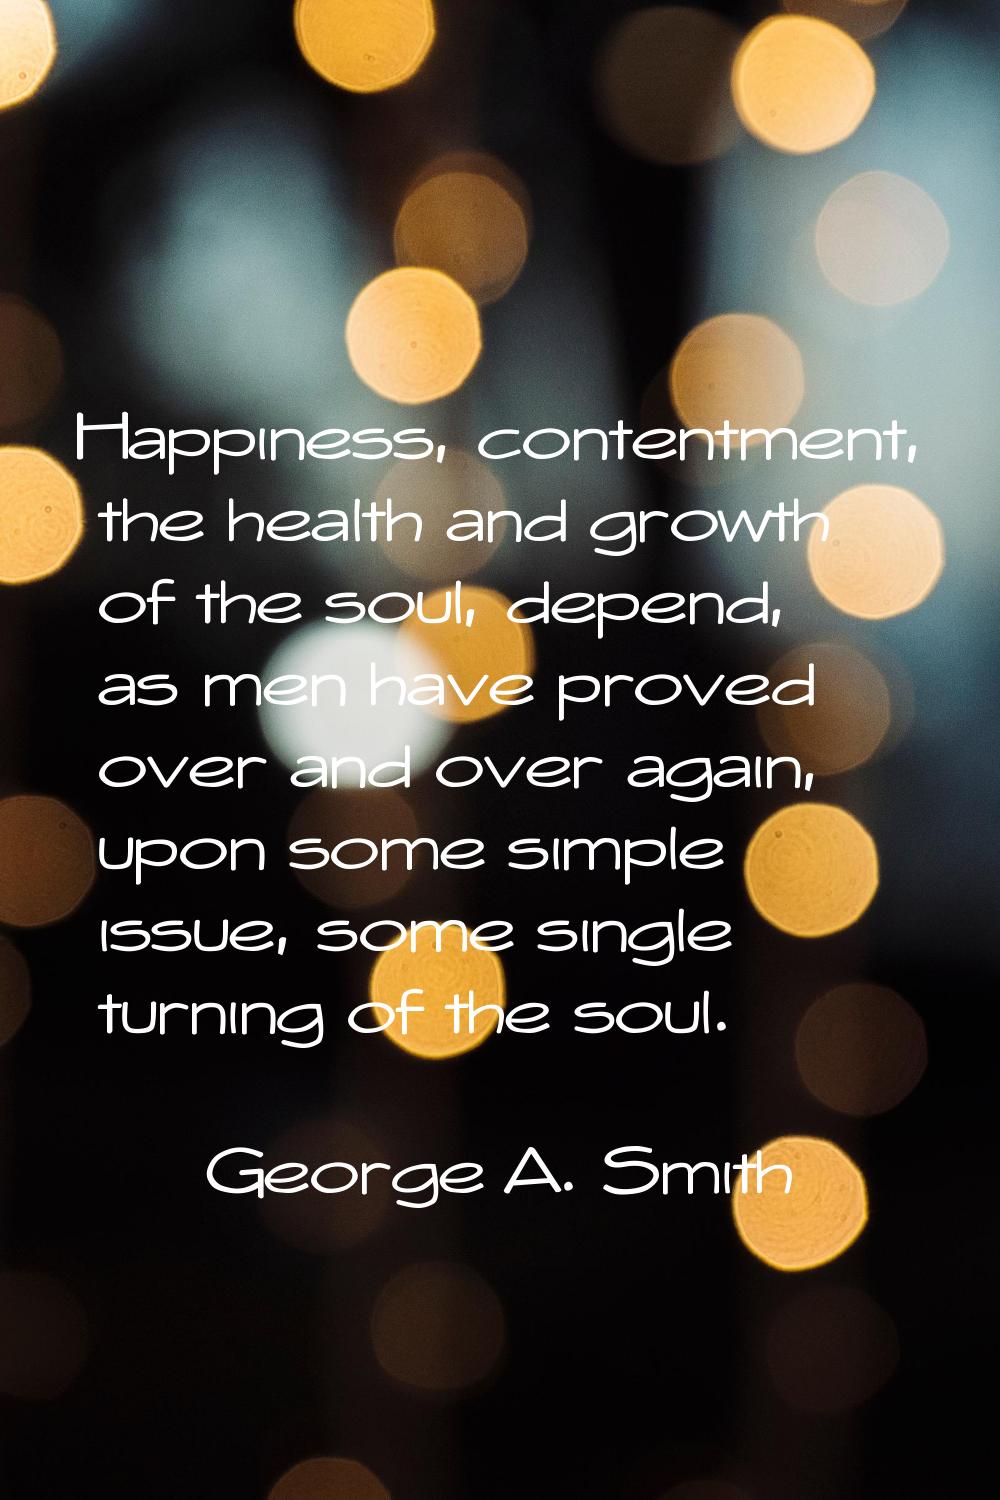 Happiness, contentment, the health and growth of the soul, depend, as men have proved over and over